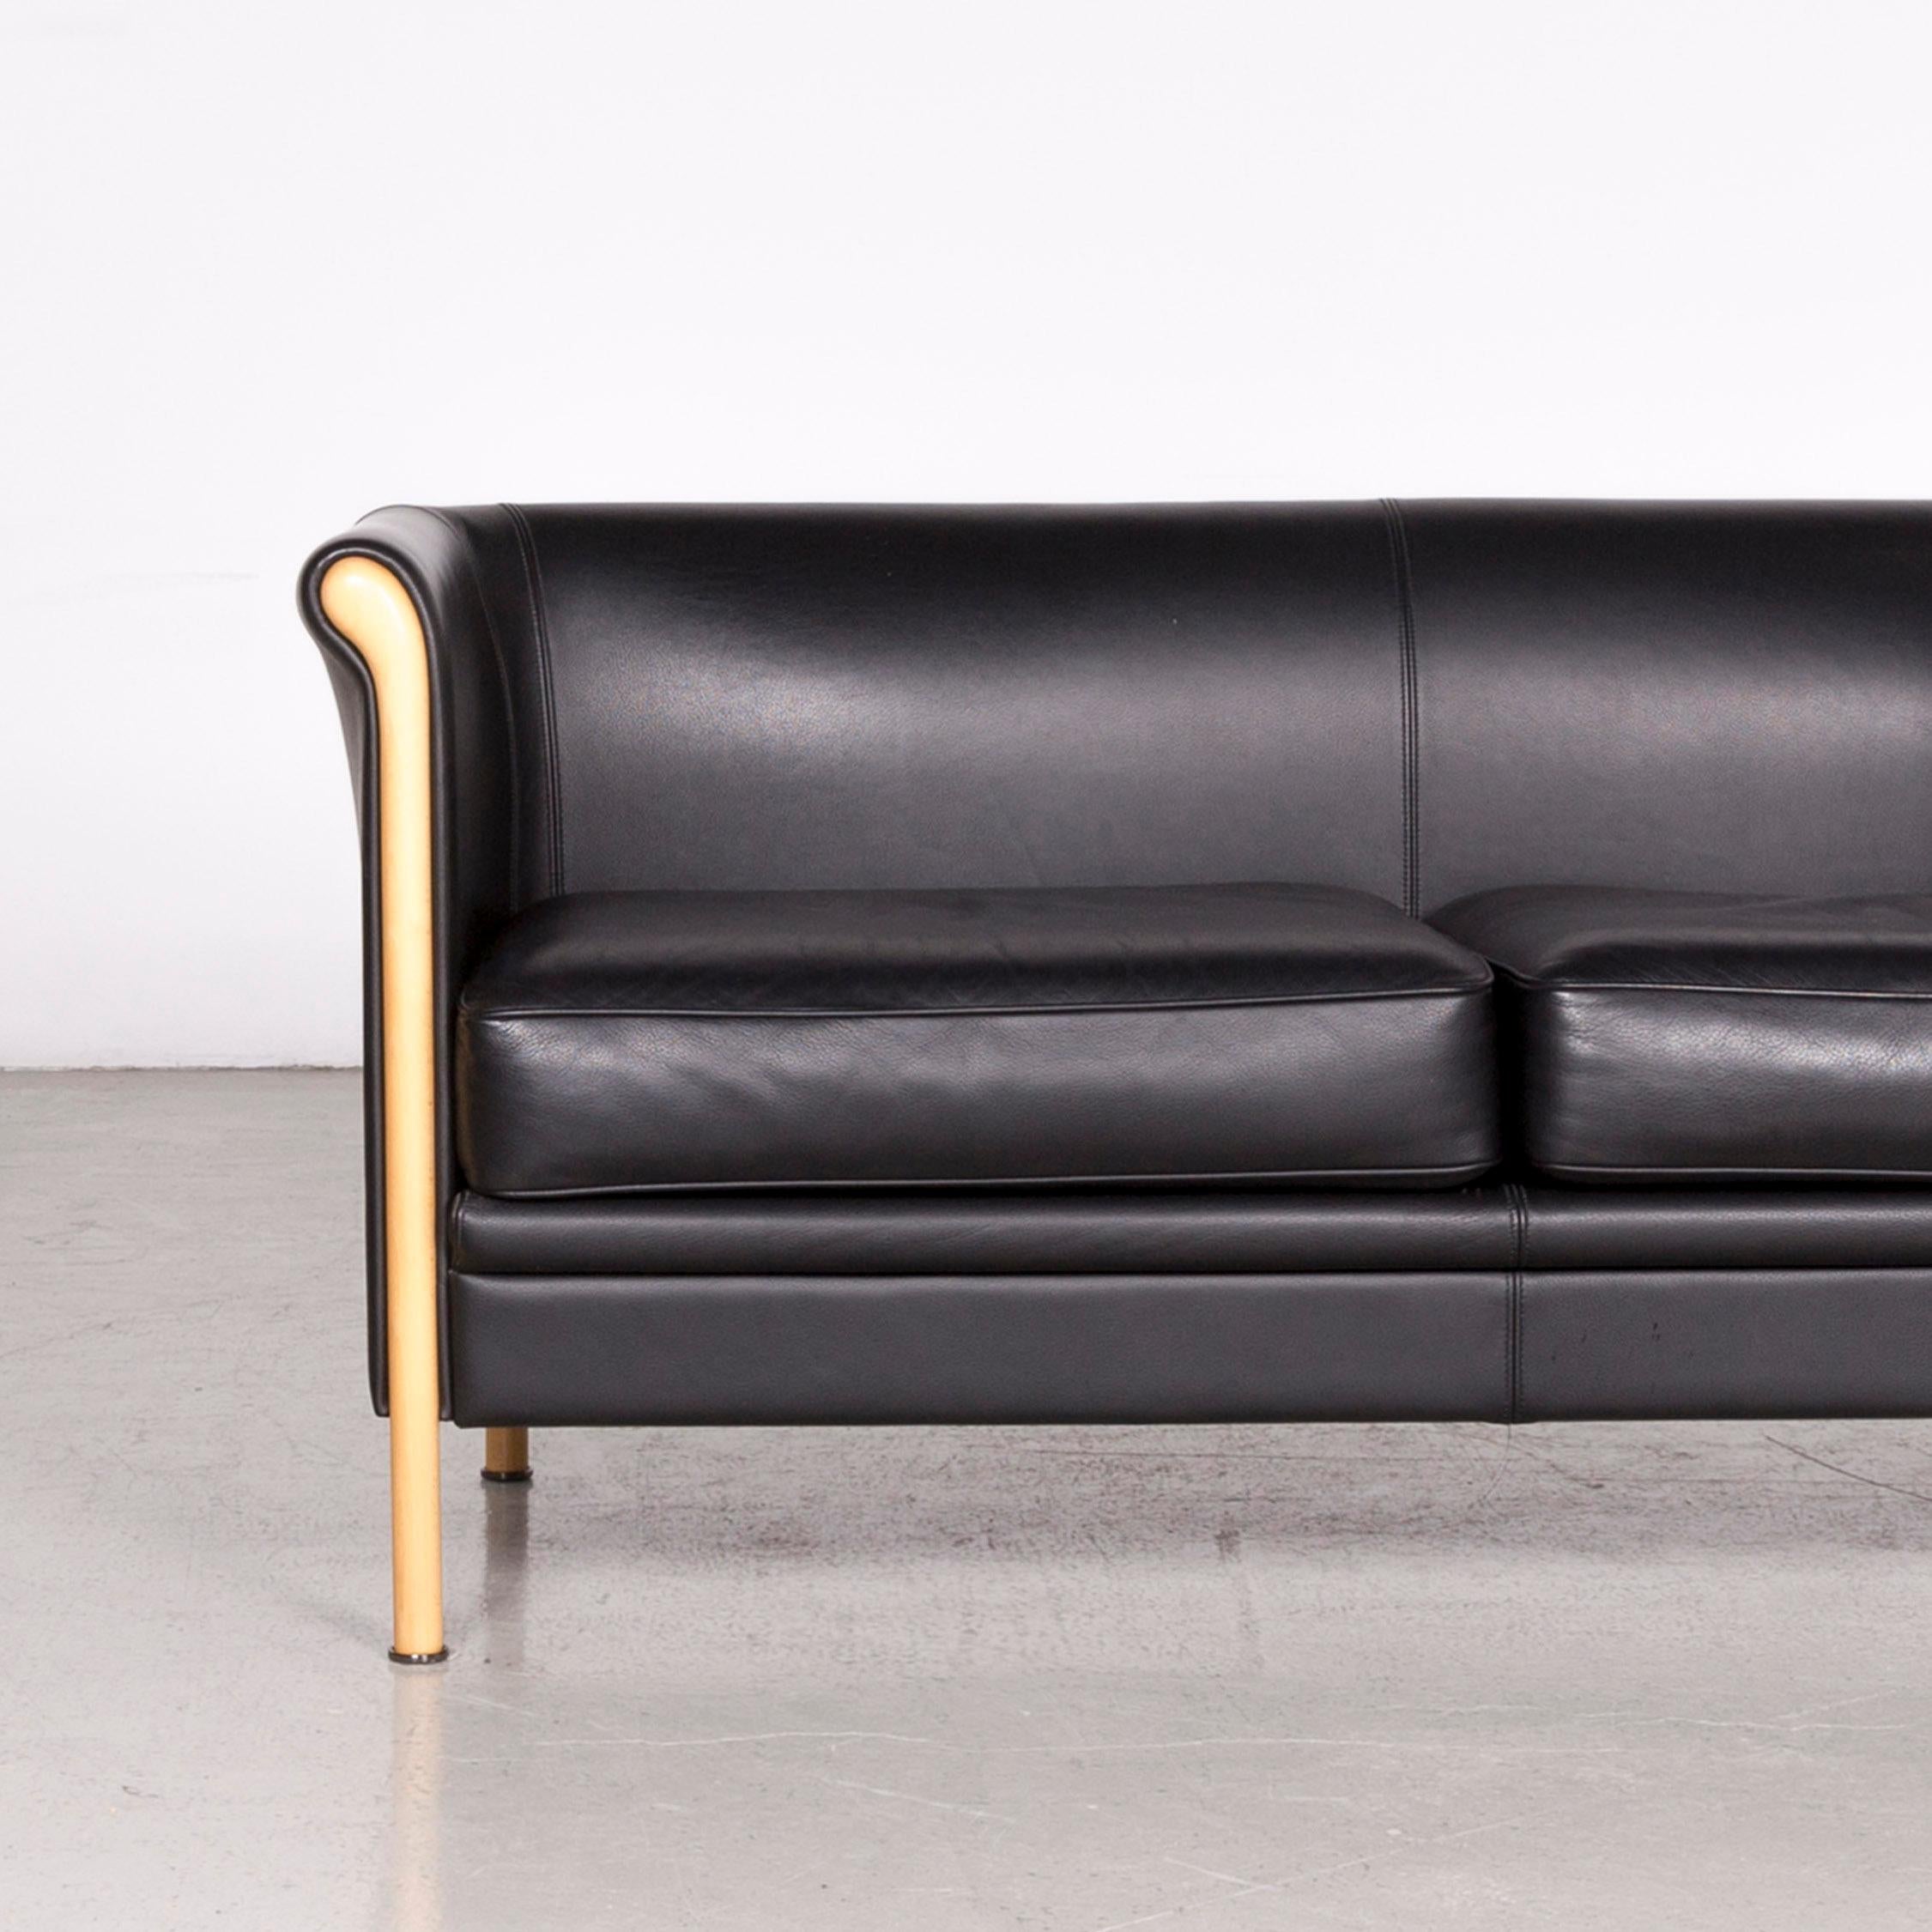 Moroso Designer Leather Sofa in Black, Two-Seat Couch In Good Condition For Sale In Cologne, DE